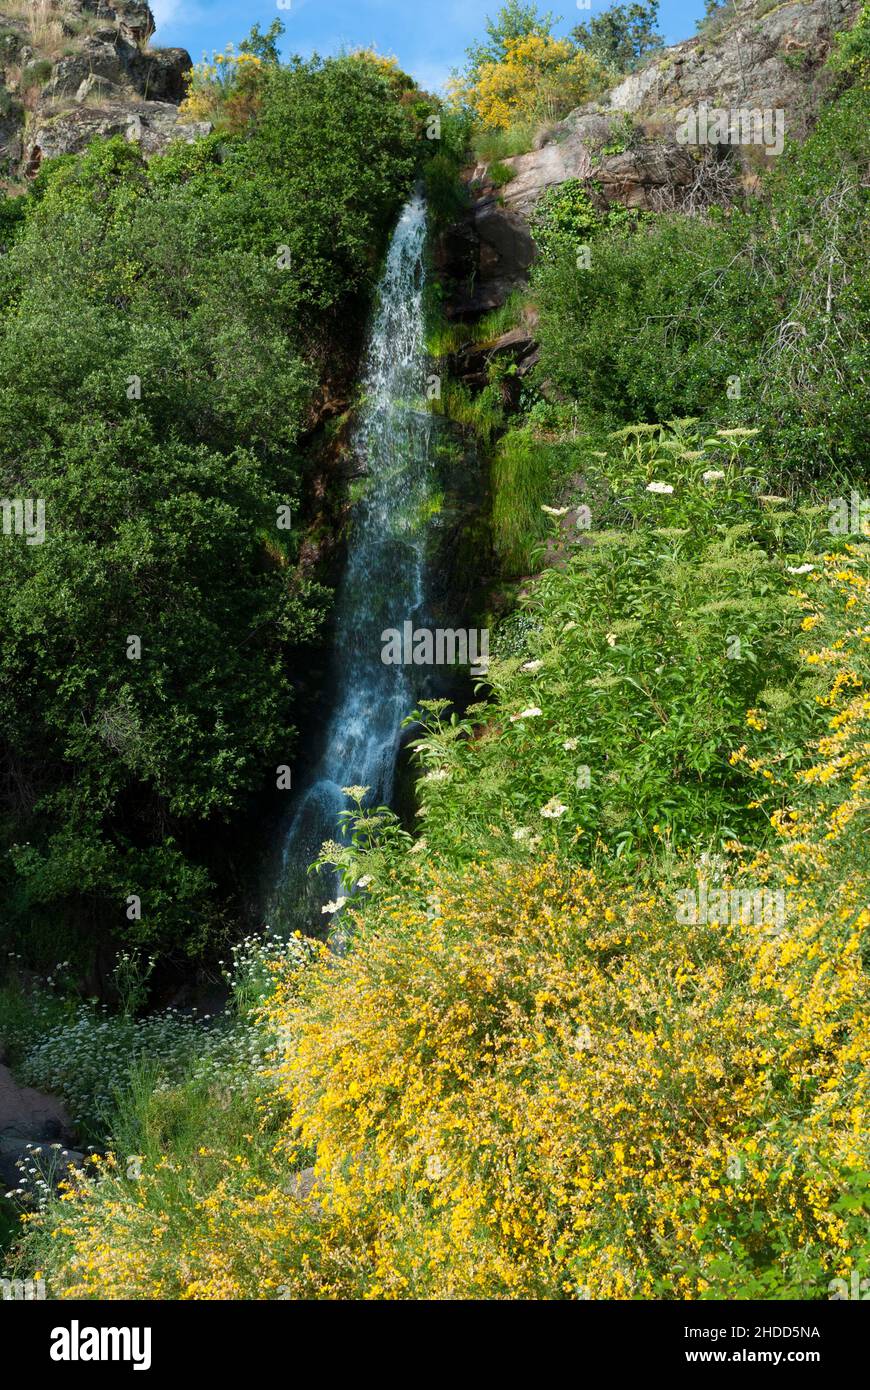 Waterfall with vegetation of yellow, white and green spring flowers with blue sky in vertical Stock Photo